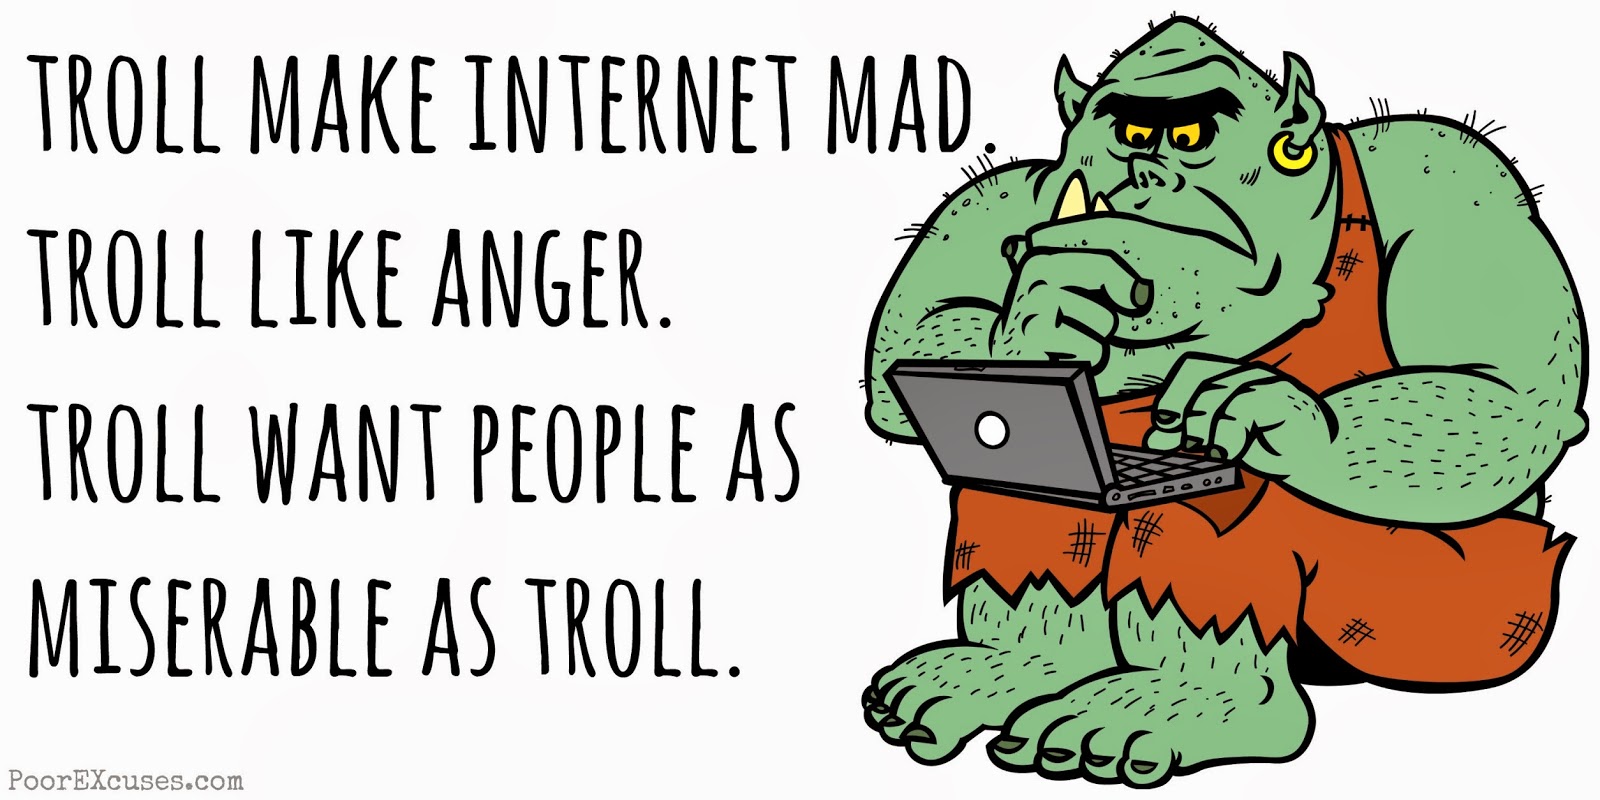 This is for lard ass okie bill and his butt buddy woodturd !!!! as they are here most everyday!! Internet+troll